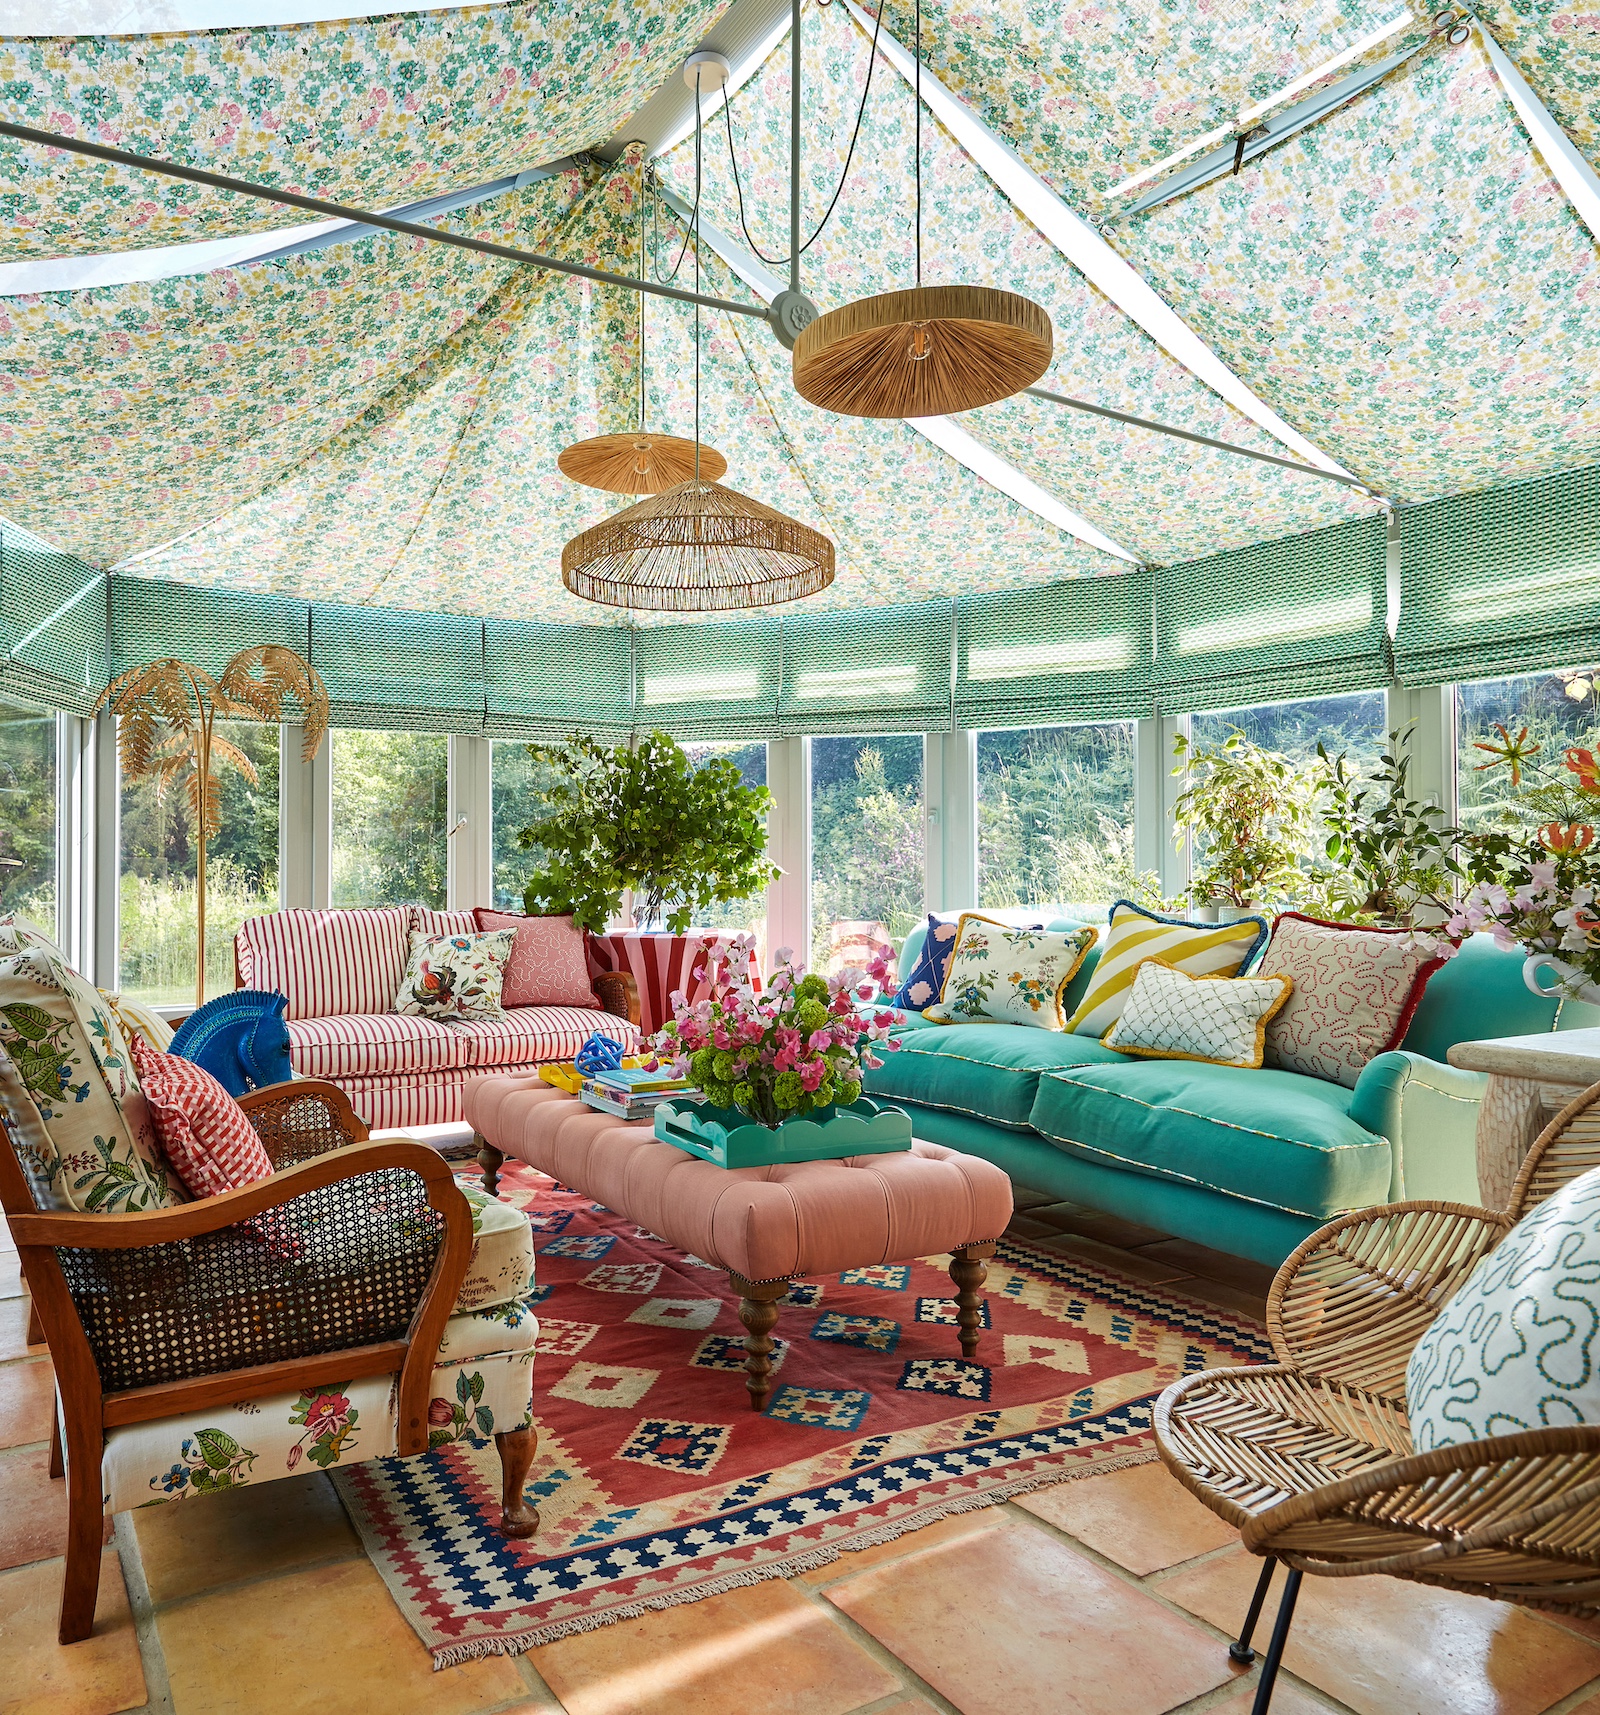 Large conservatory filled with colour sofas, armchairs, cushions and rugs. On the windows are green patterned roman blinds, half down to reveal some sunlight and on the ceiling floral fabric is draped across the glass roof to create a cosy atmosphere.  